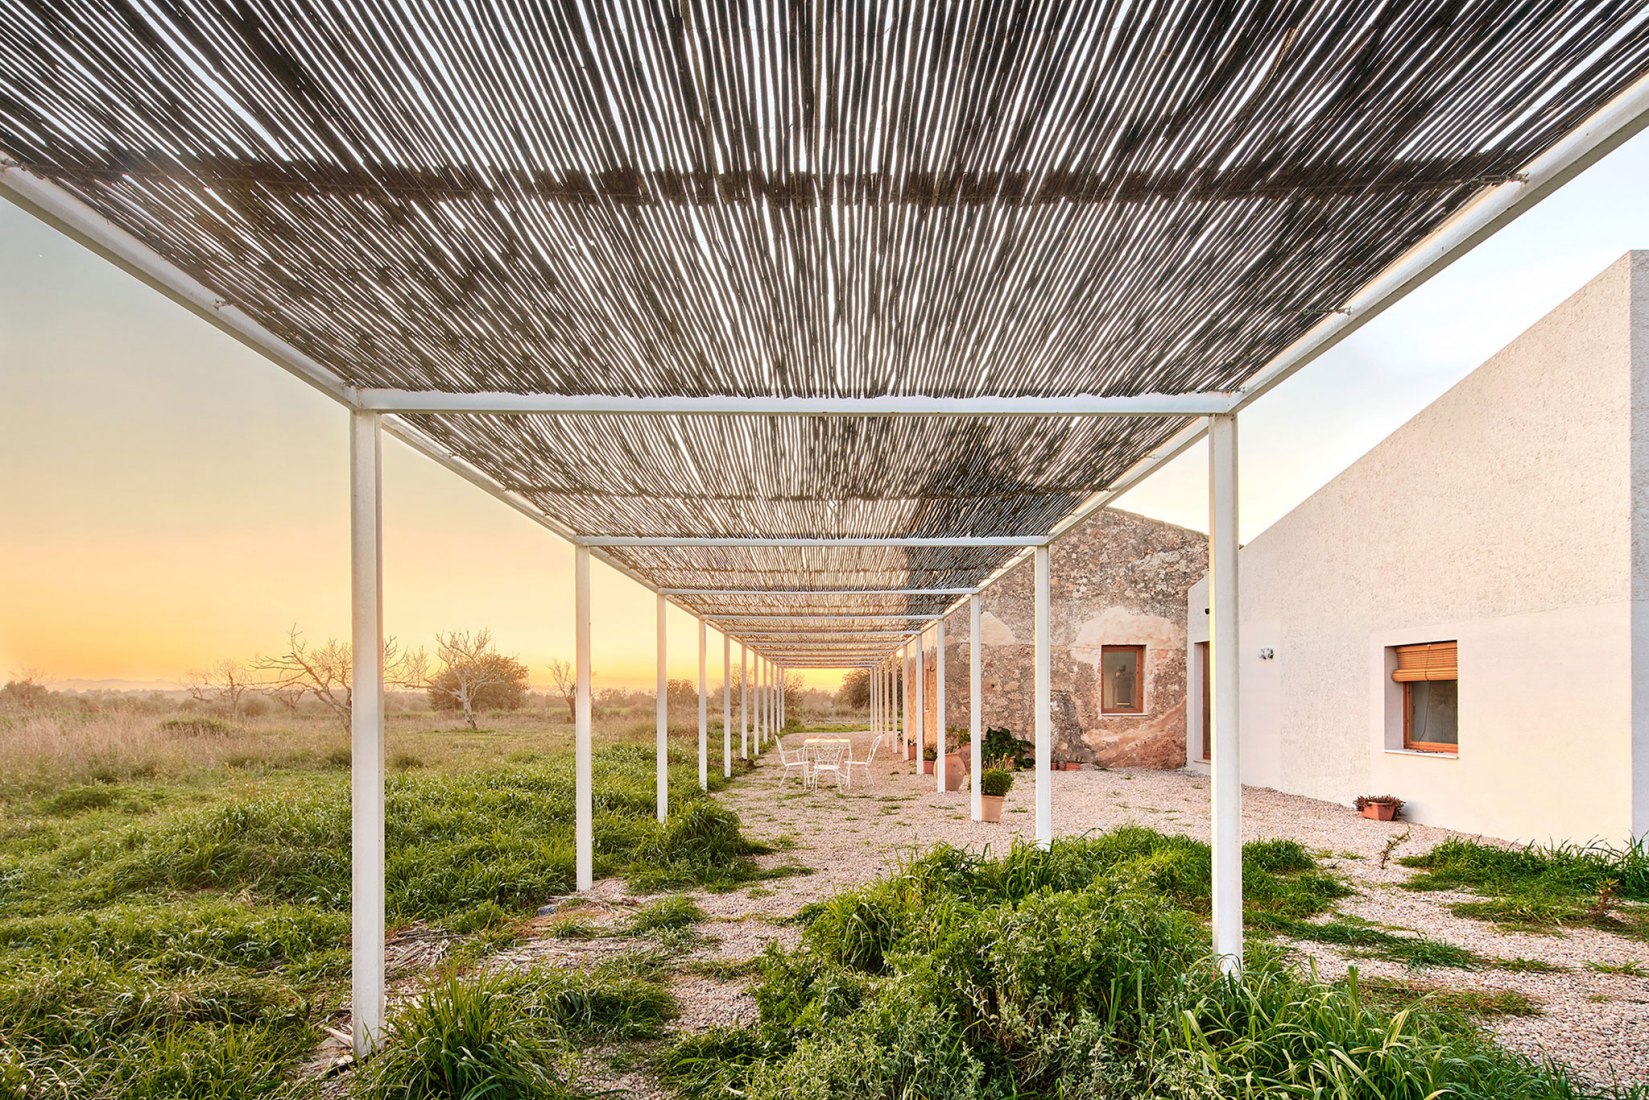 Inhabiting the countryside by Flexoarquitectura + Bàrbara Vich. Photograph by José Hevia.